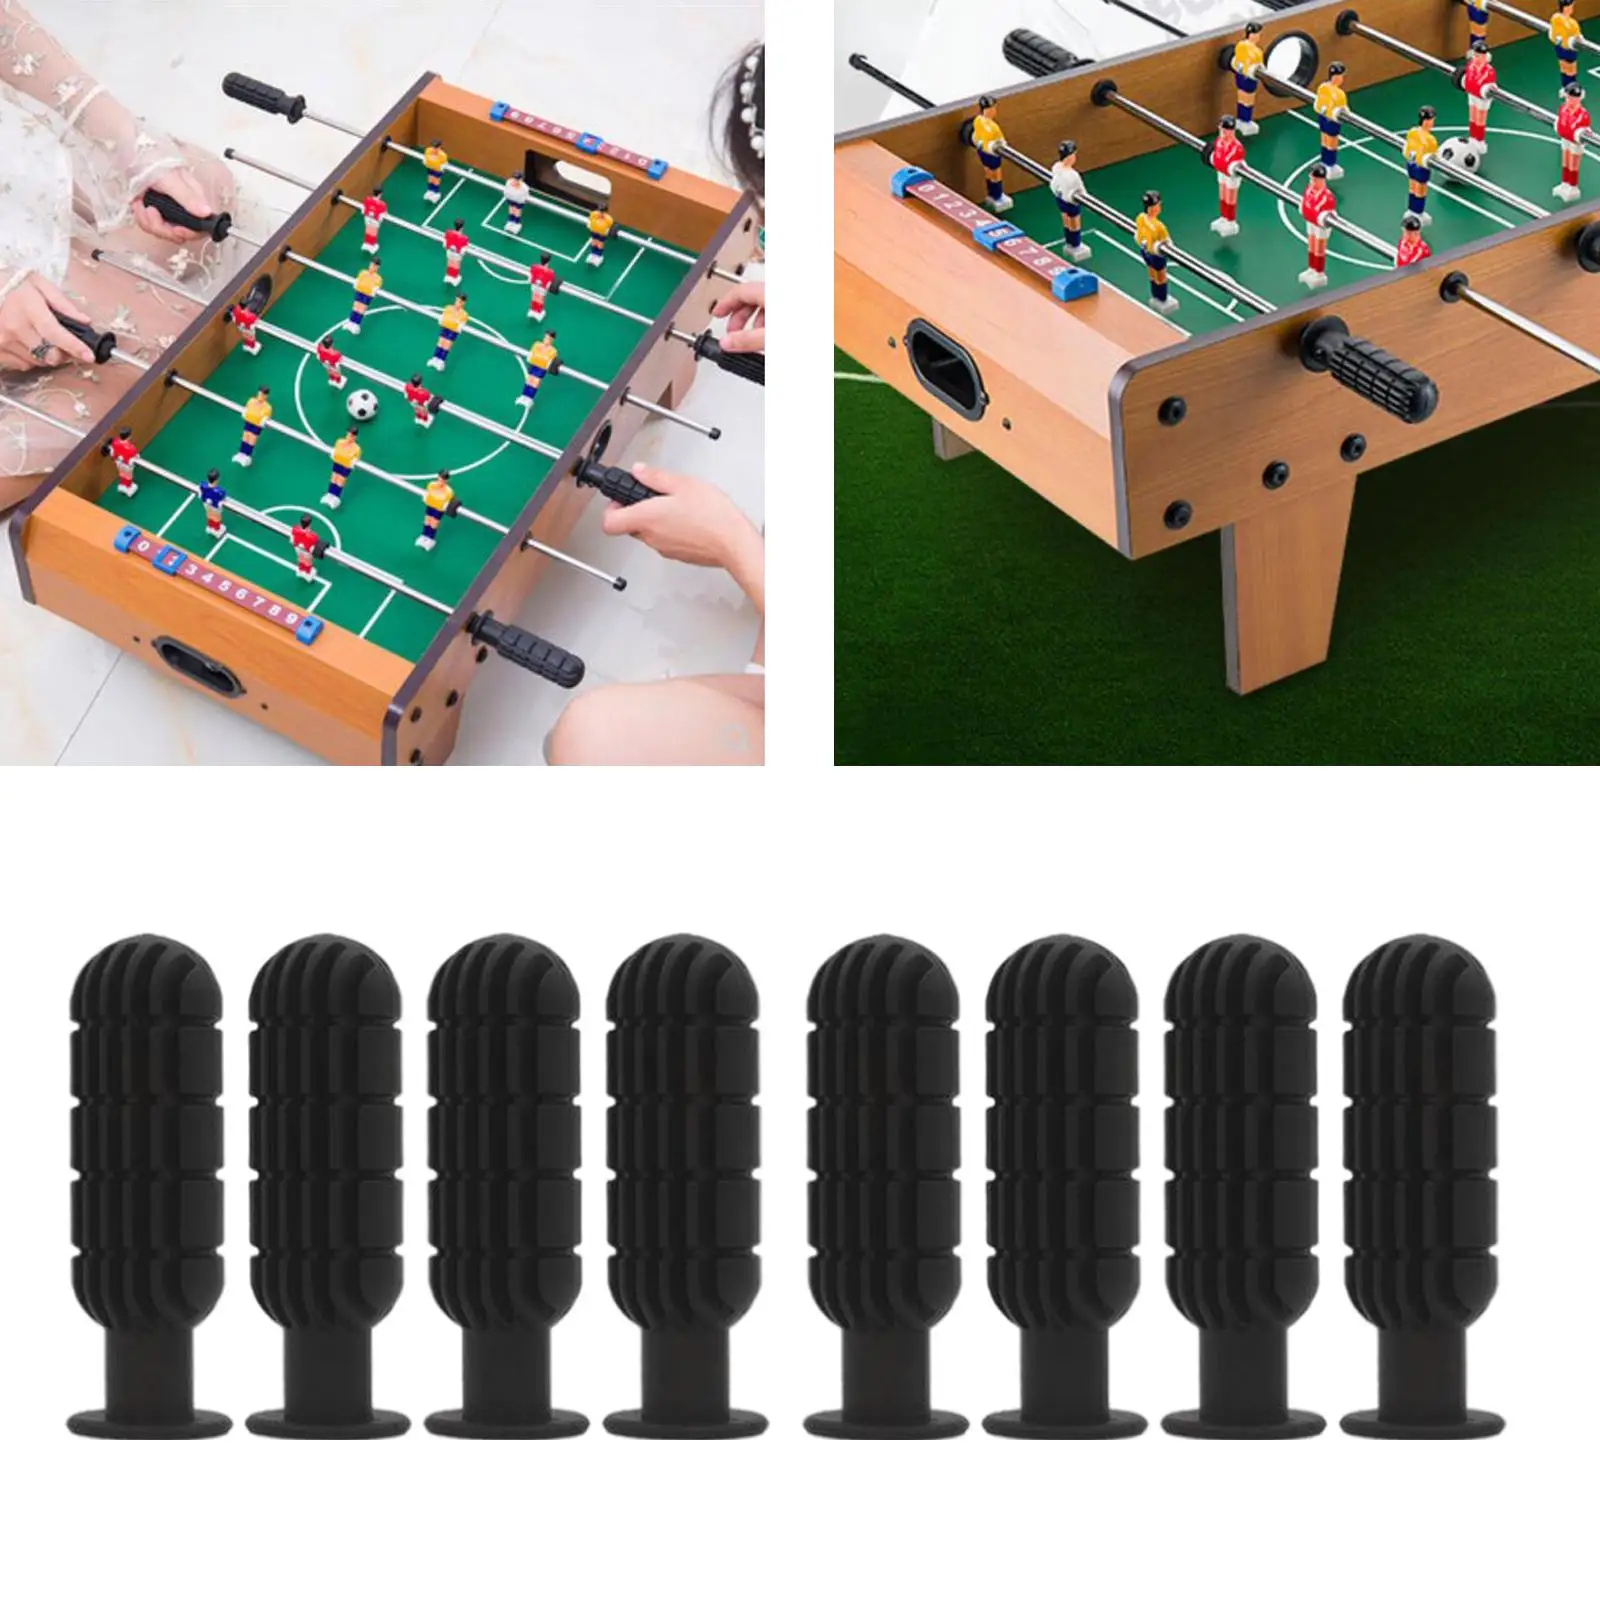 Foosball Handle Grips for Foosball Table, Table Soccer Foosball Accessories for 11/2 Inch Foosball Rods, 8 Pack